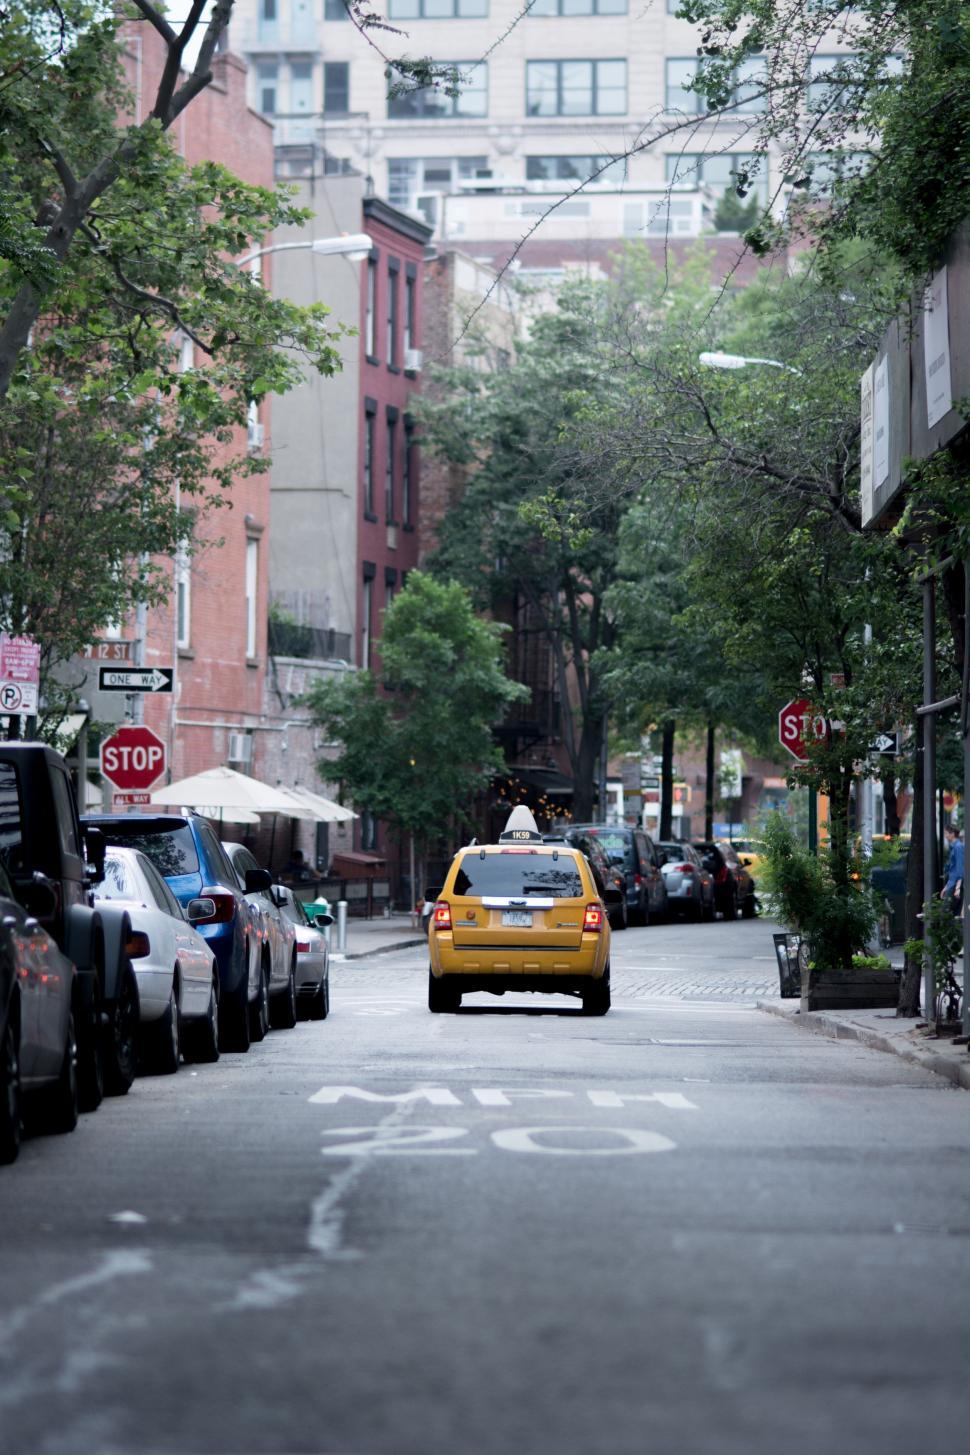 Free Image of Yellow Taxi Cab Driving Down City Street 